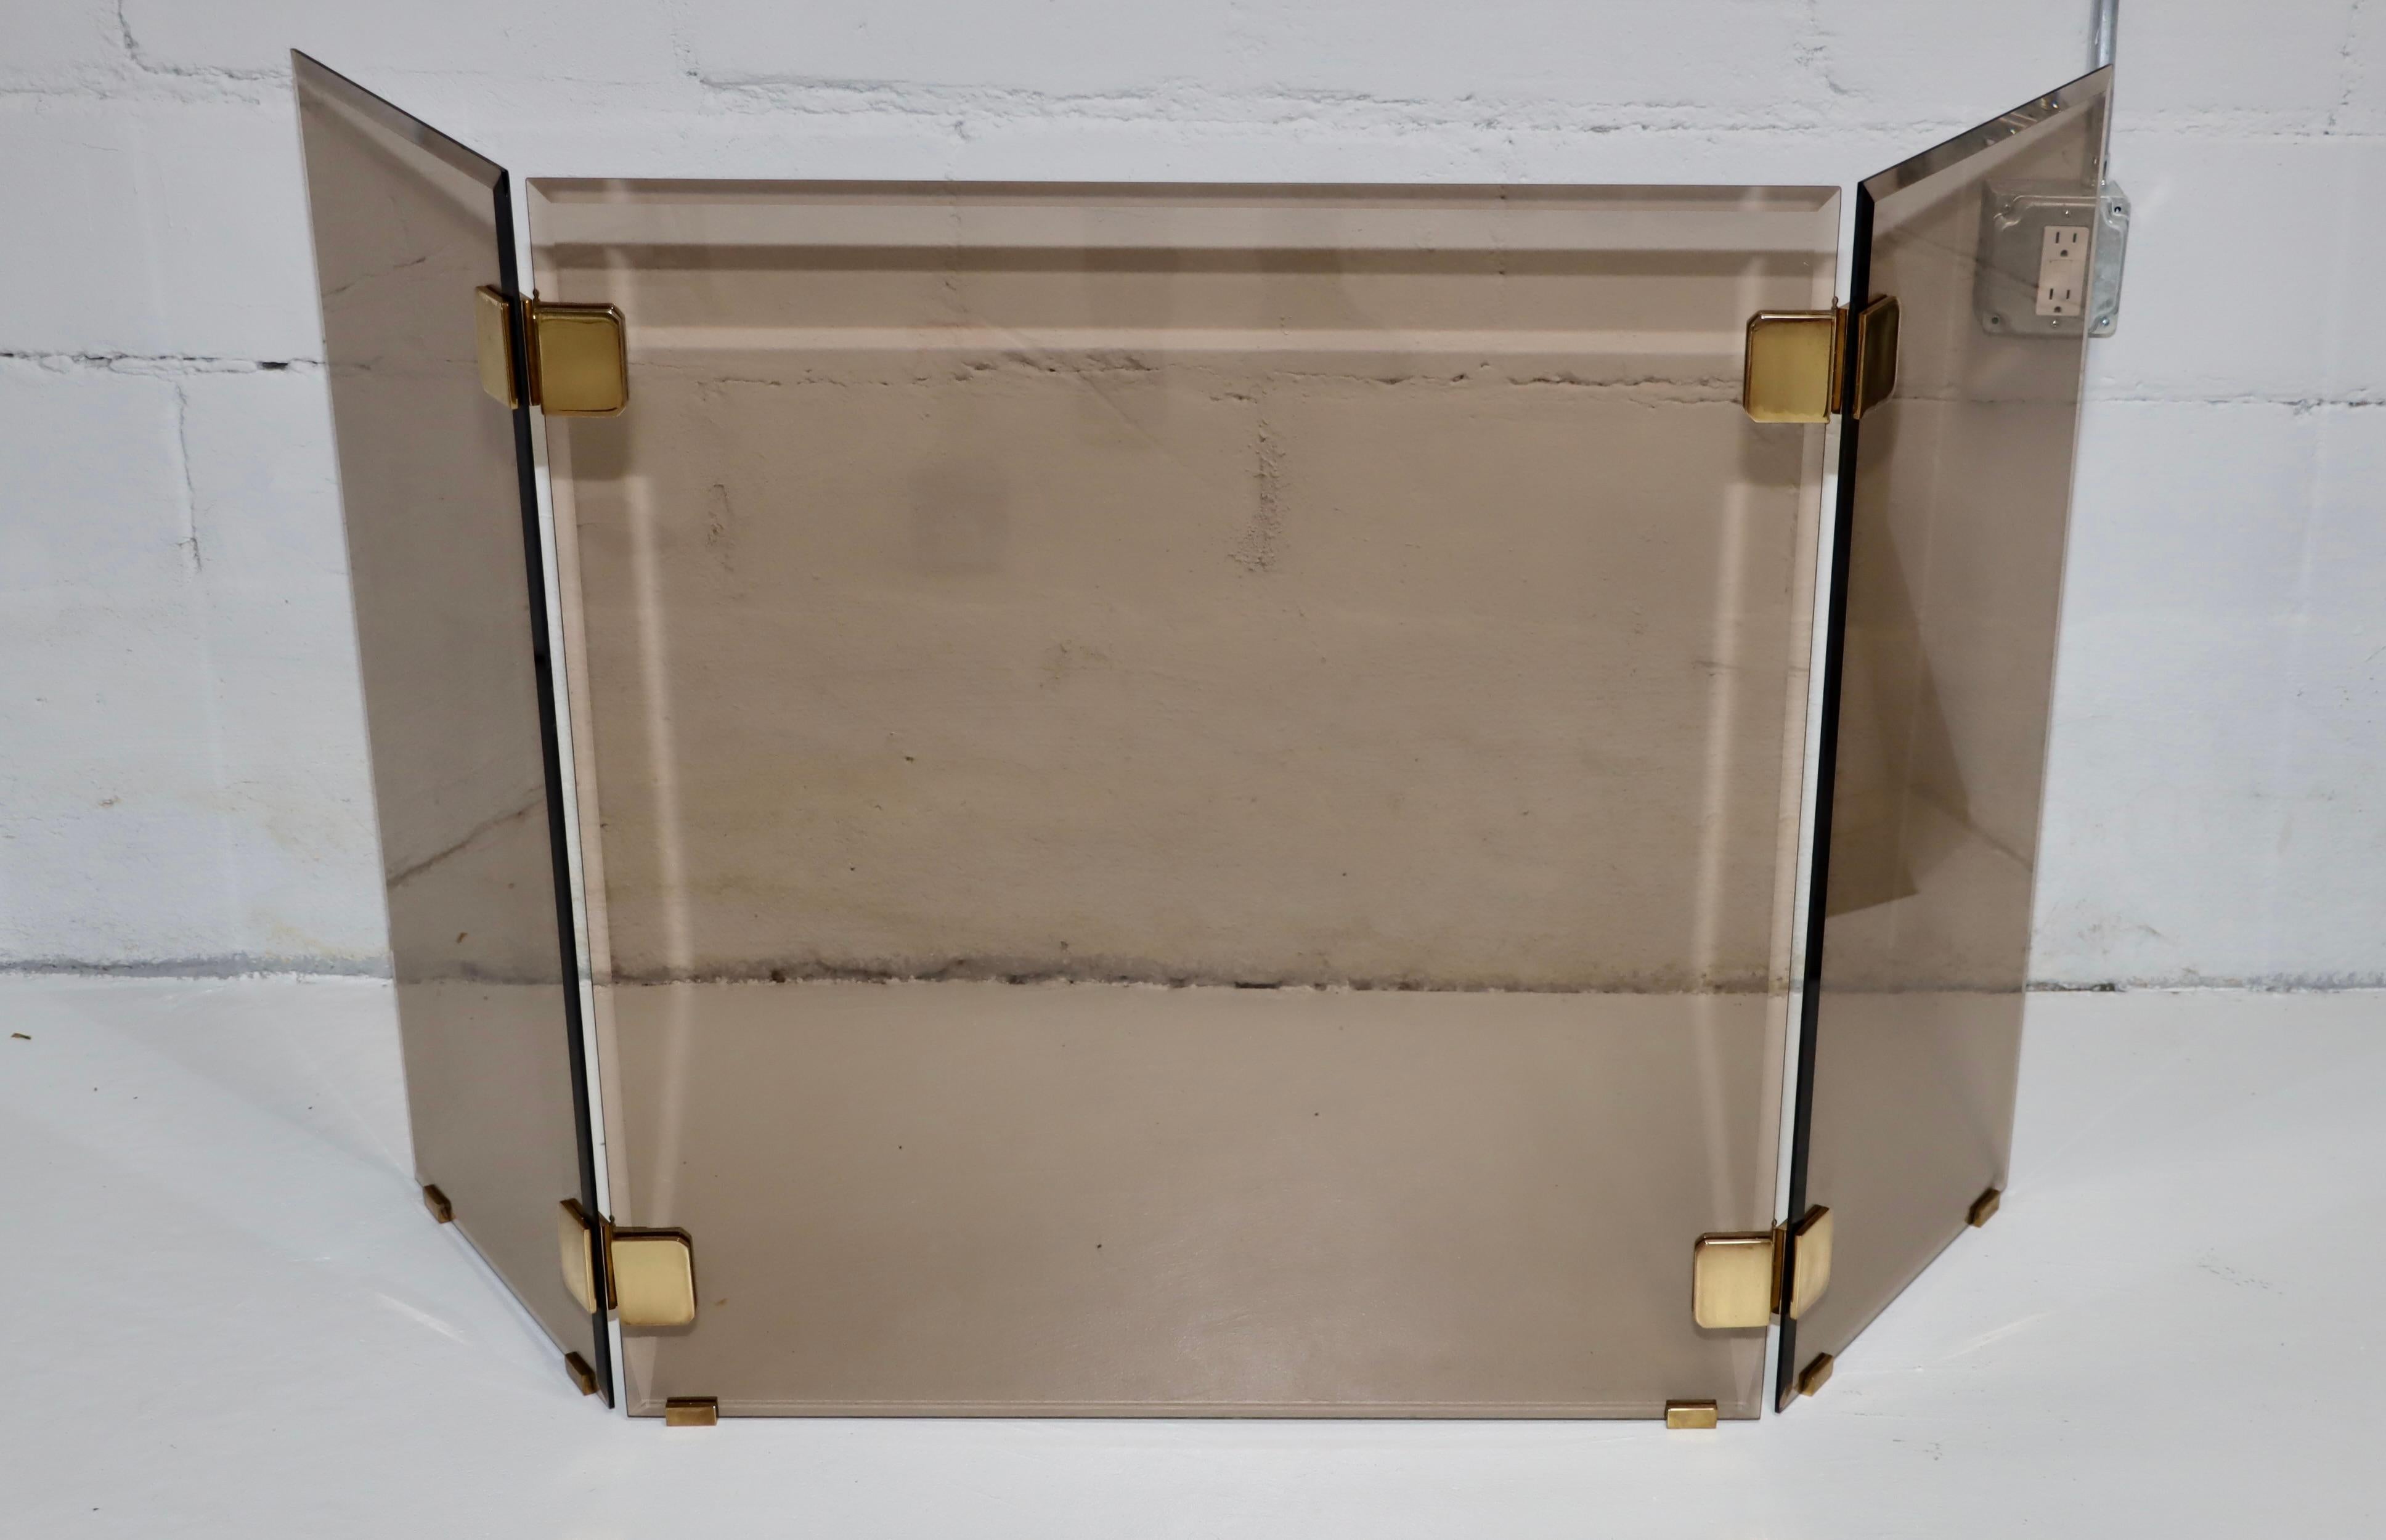 1980's mid-century modern solid brass and smoke glass tri-fold fireplace screen, in vintage original condition with minor wear and patina to the brass due to age and use, there is a minor chip to one of the glass panels as shown in the last picture.